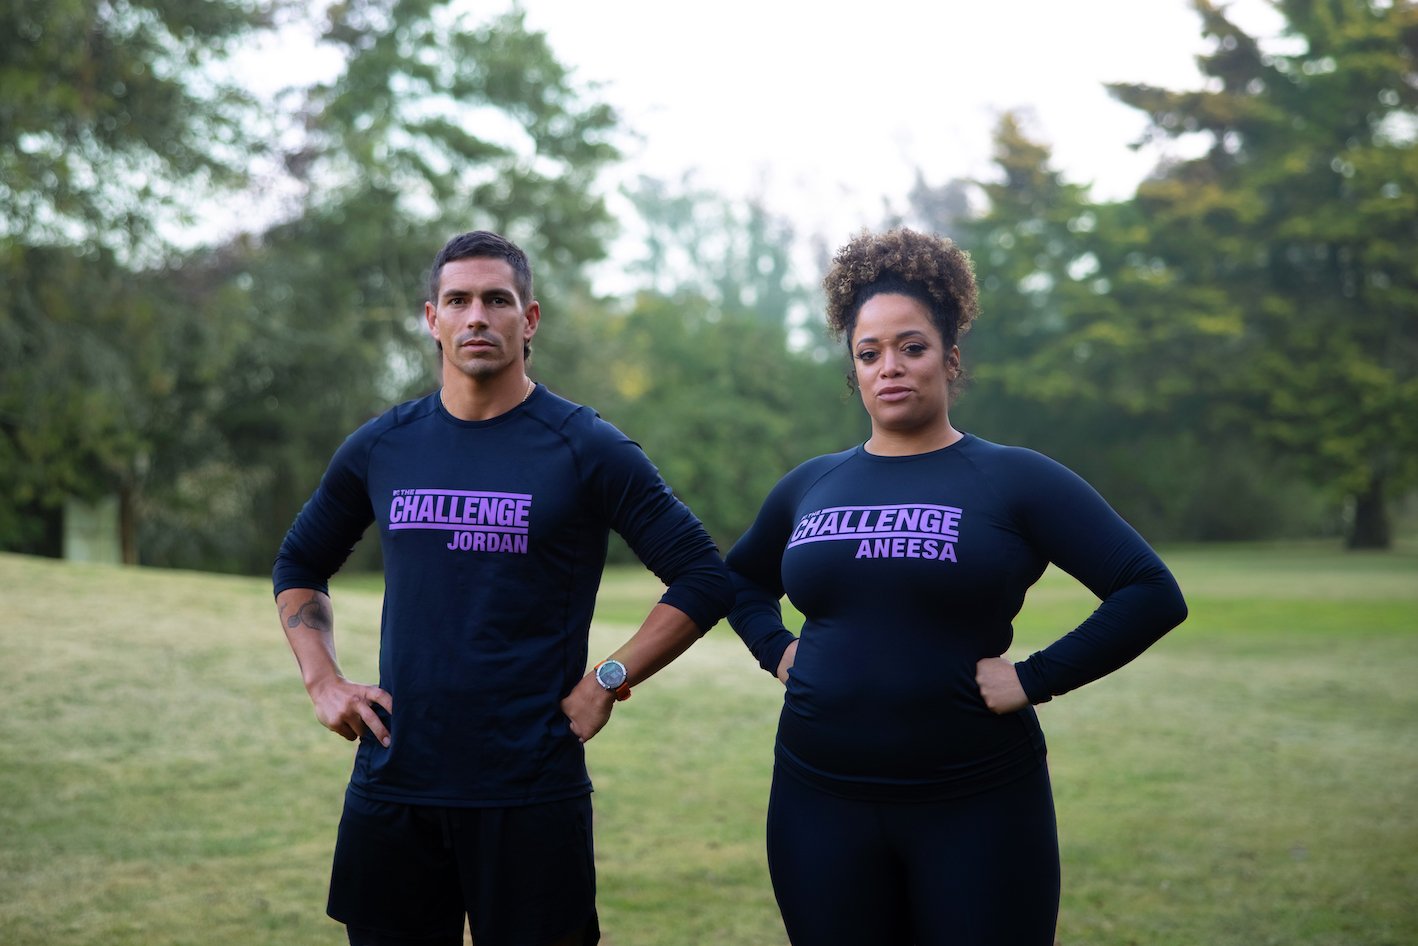 Jordan Wiseley and Aneesa Ferreira standing in their uniforms with their hands on their hips for 'The Challenge' Season 38.